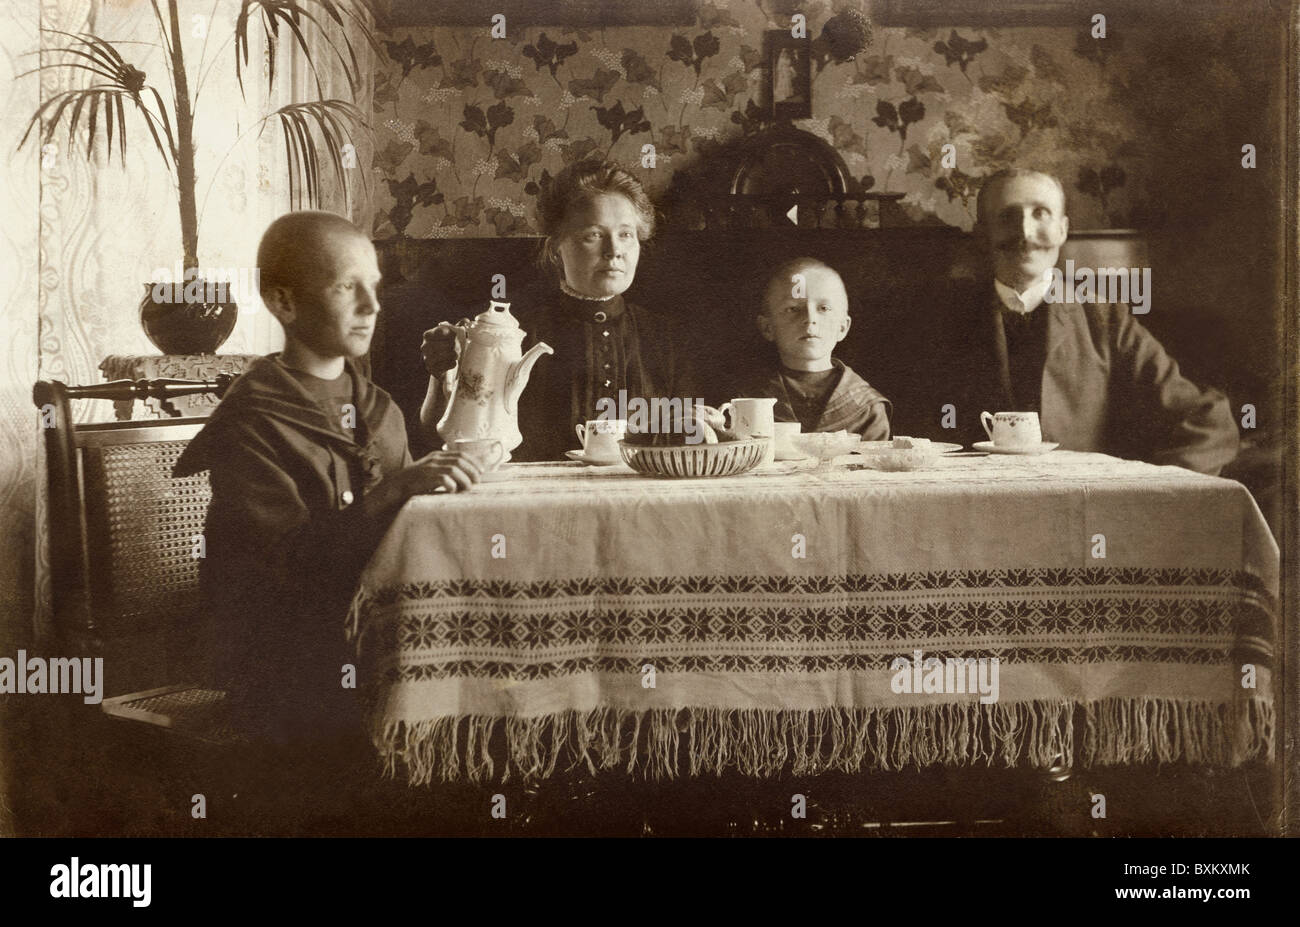 people, family having coffee and cake, Leipzig, Saxony, Germany, 1919, Additional-Rights-Clearences-Not Available Stock Photo